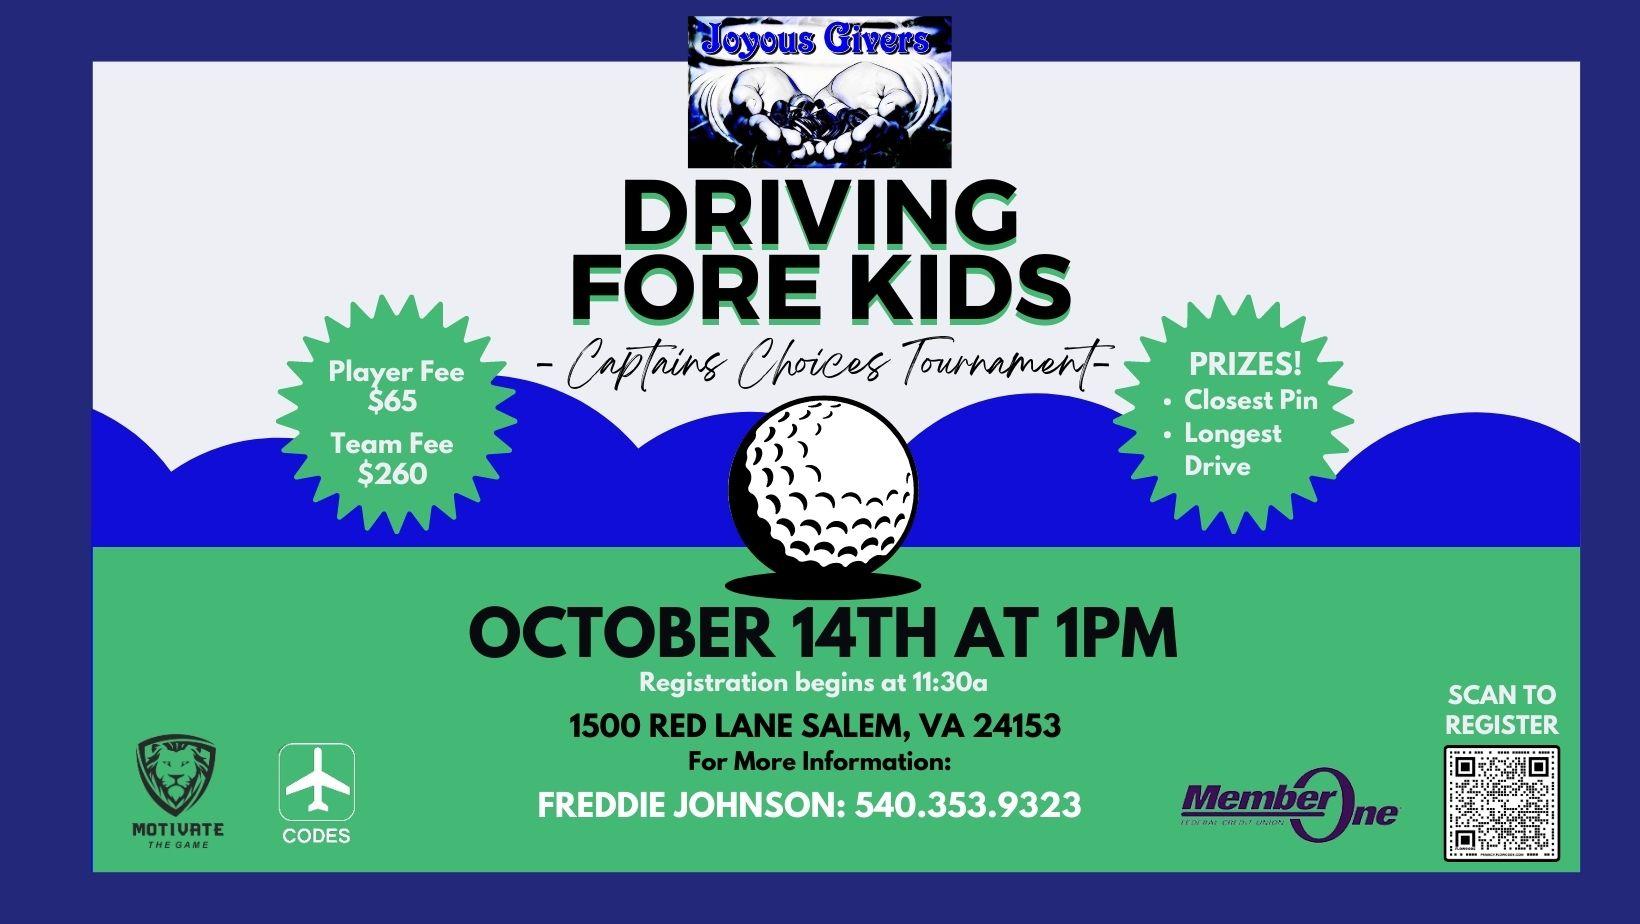 Driving Fore Kids Golf Tournament by Joyous Givers